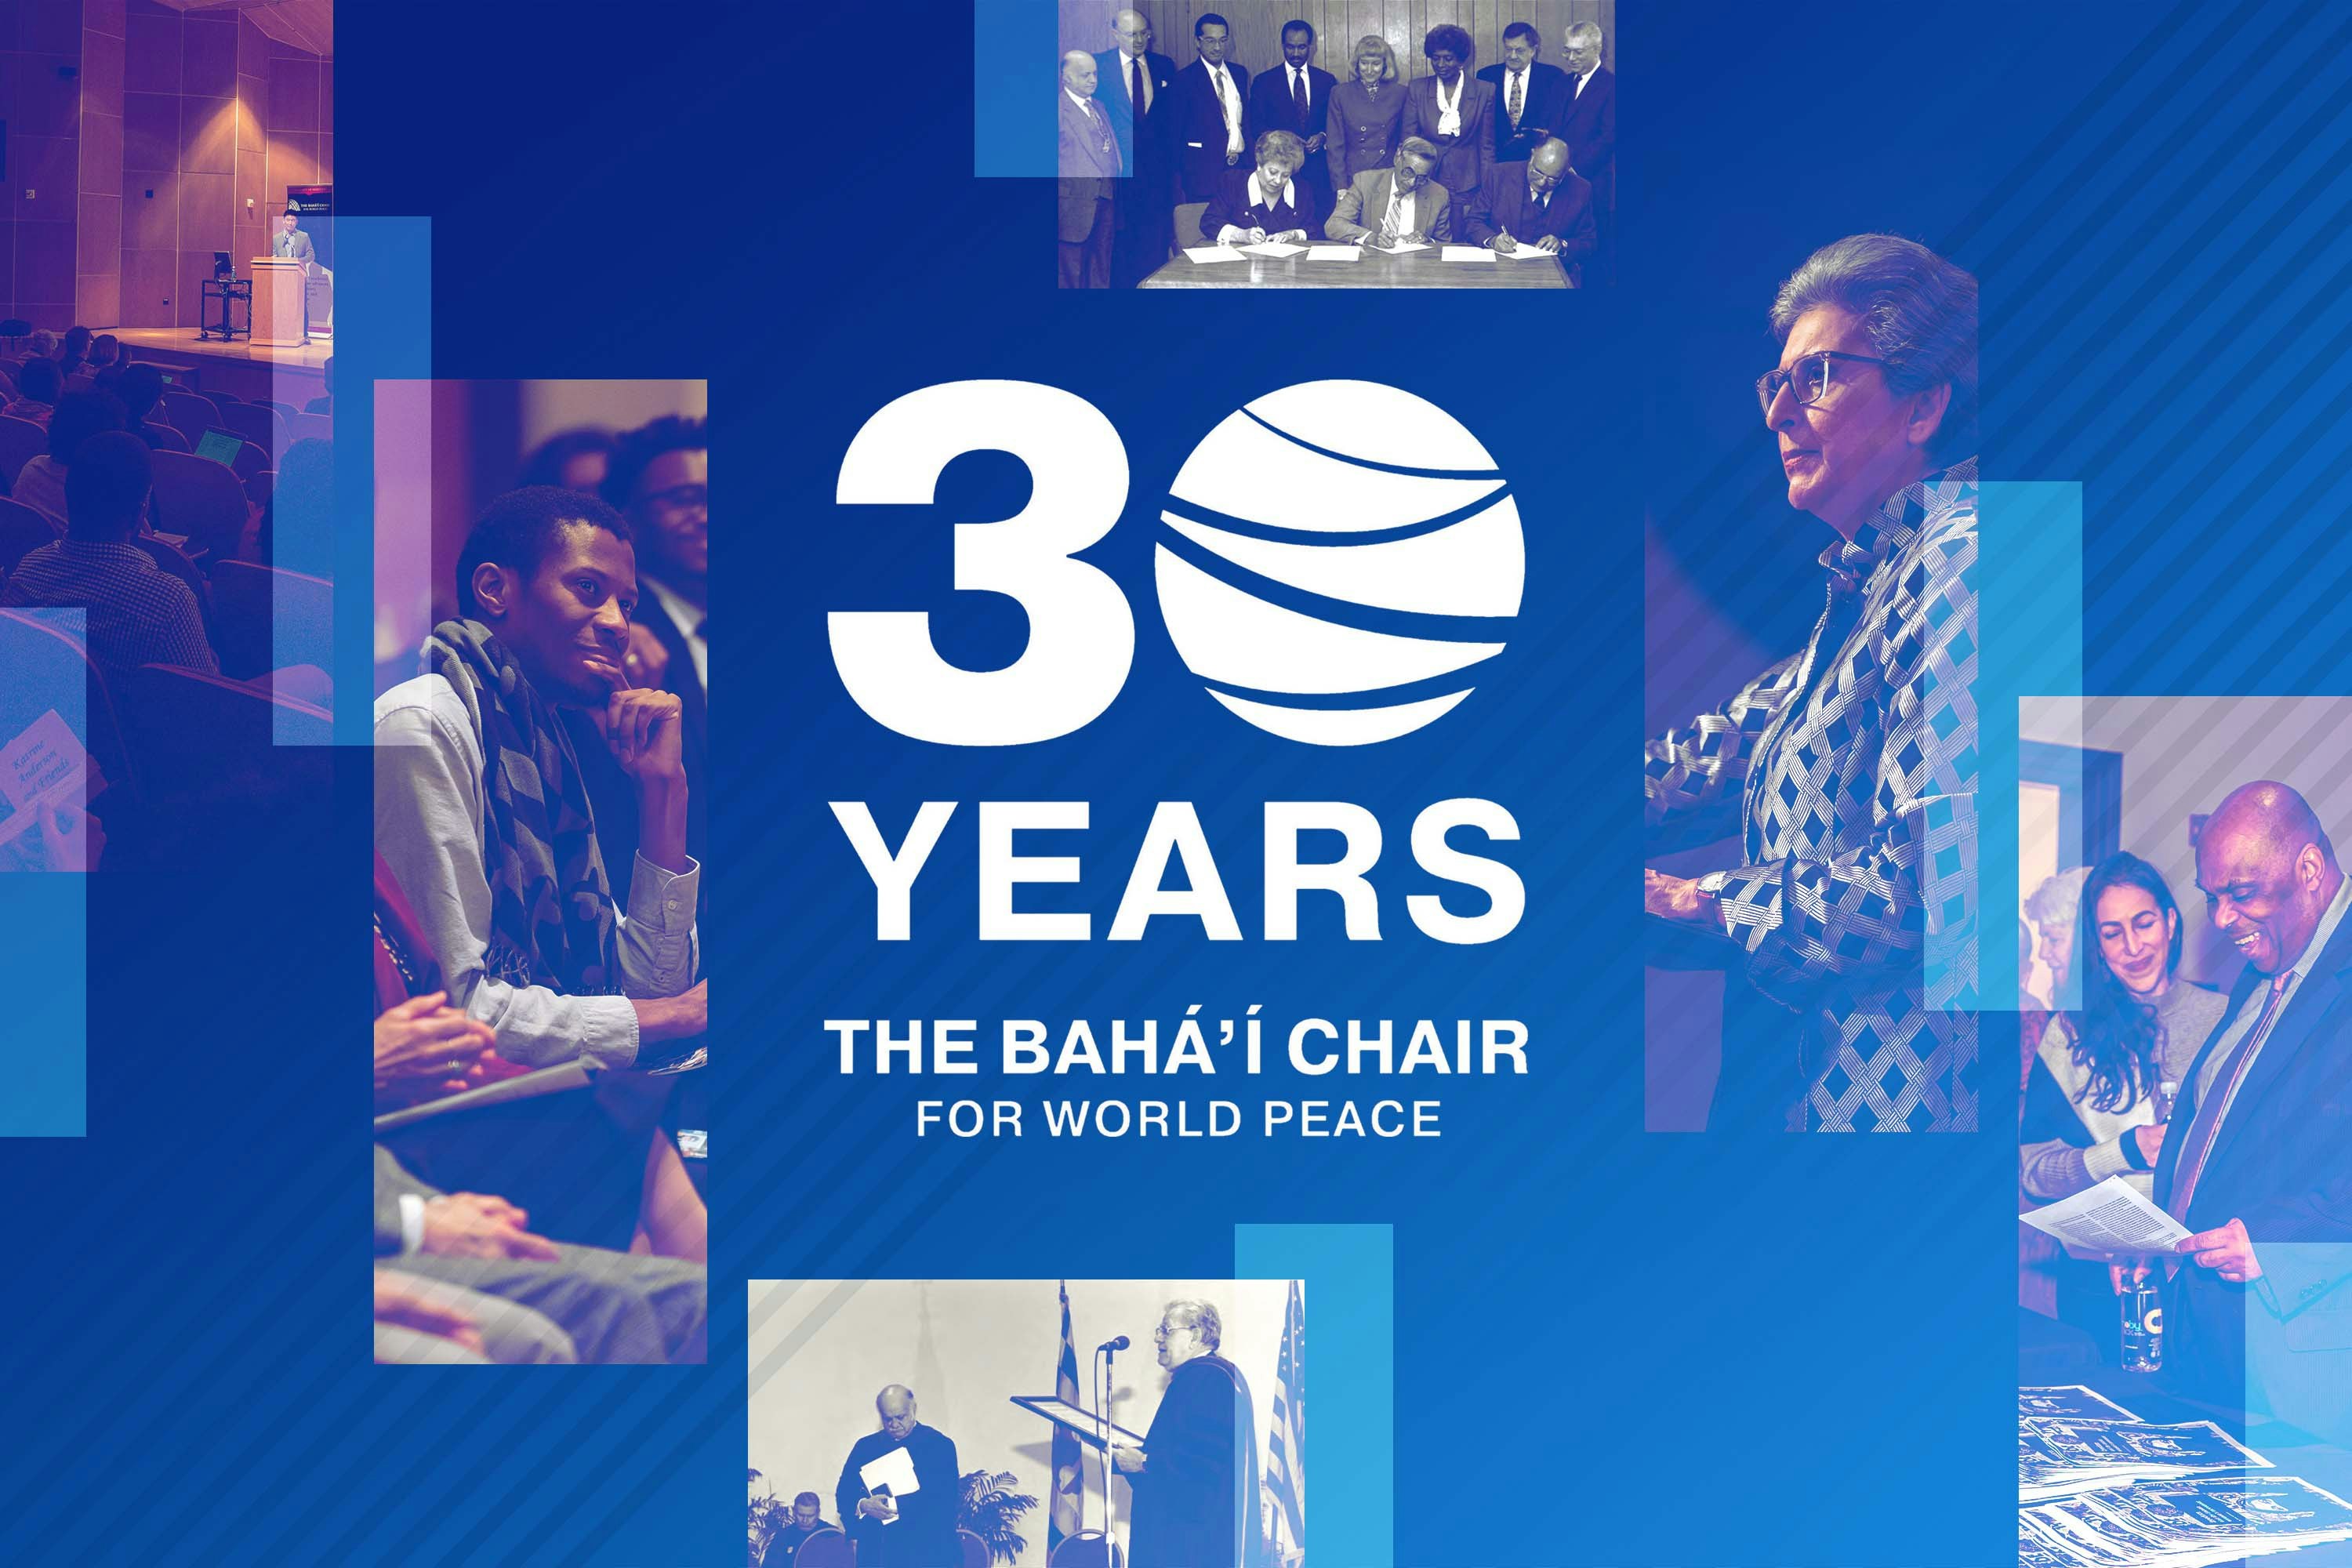 Maryland Bahá’í Chair: Marking 30 years of promoting dialogue and peace